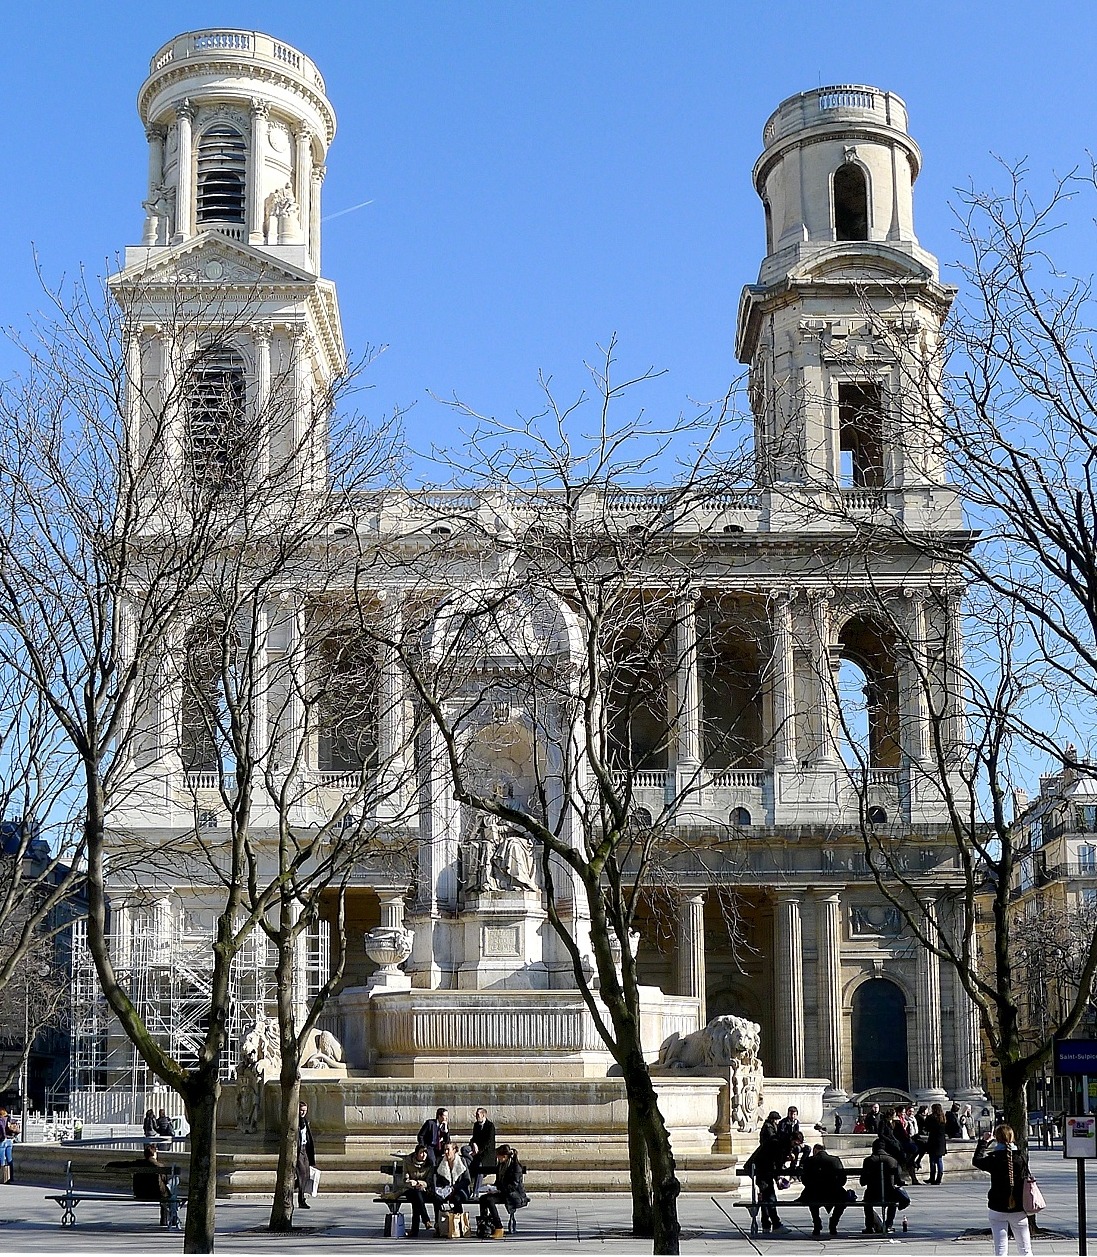 Saint-Sulpice church situated in Paris